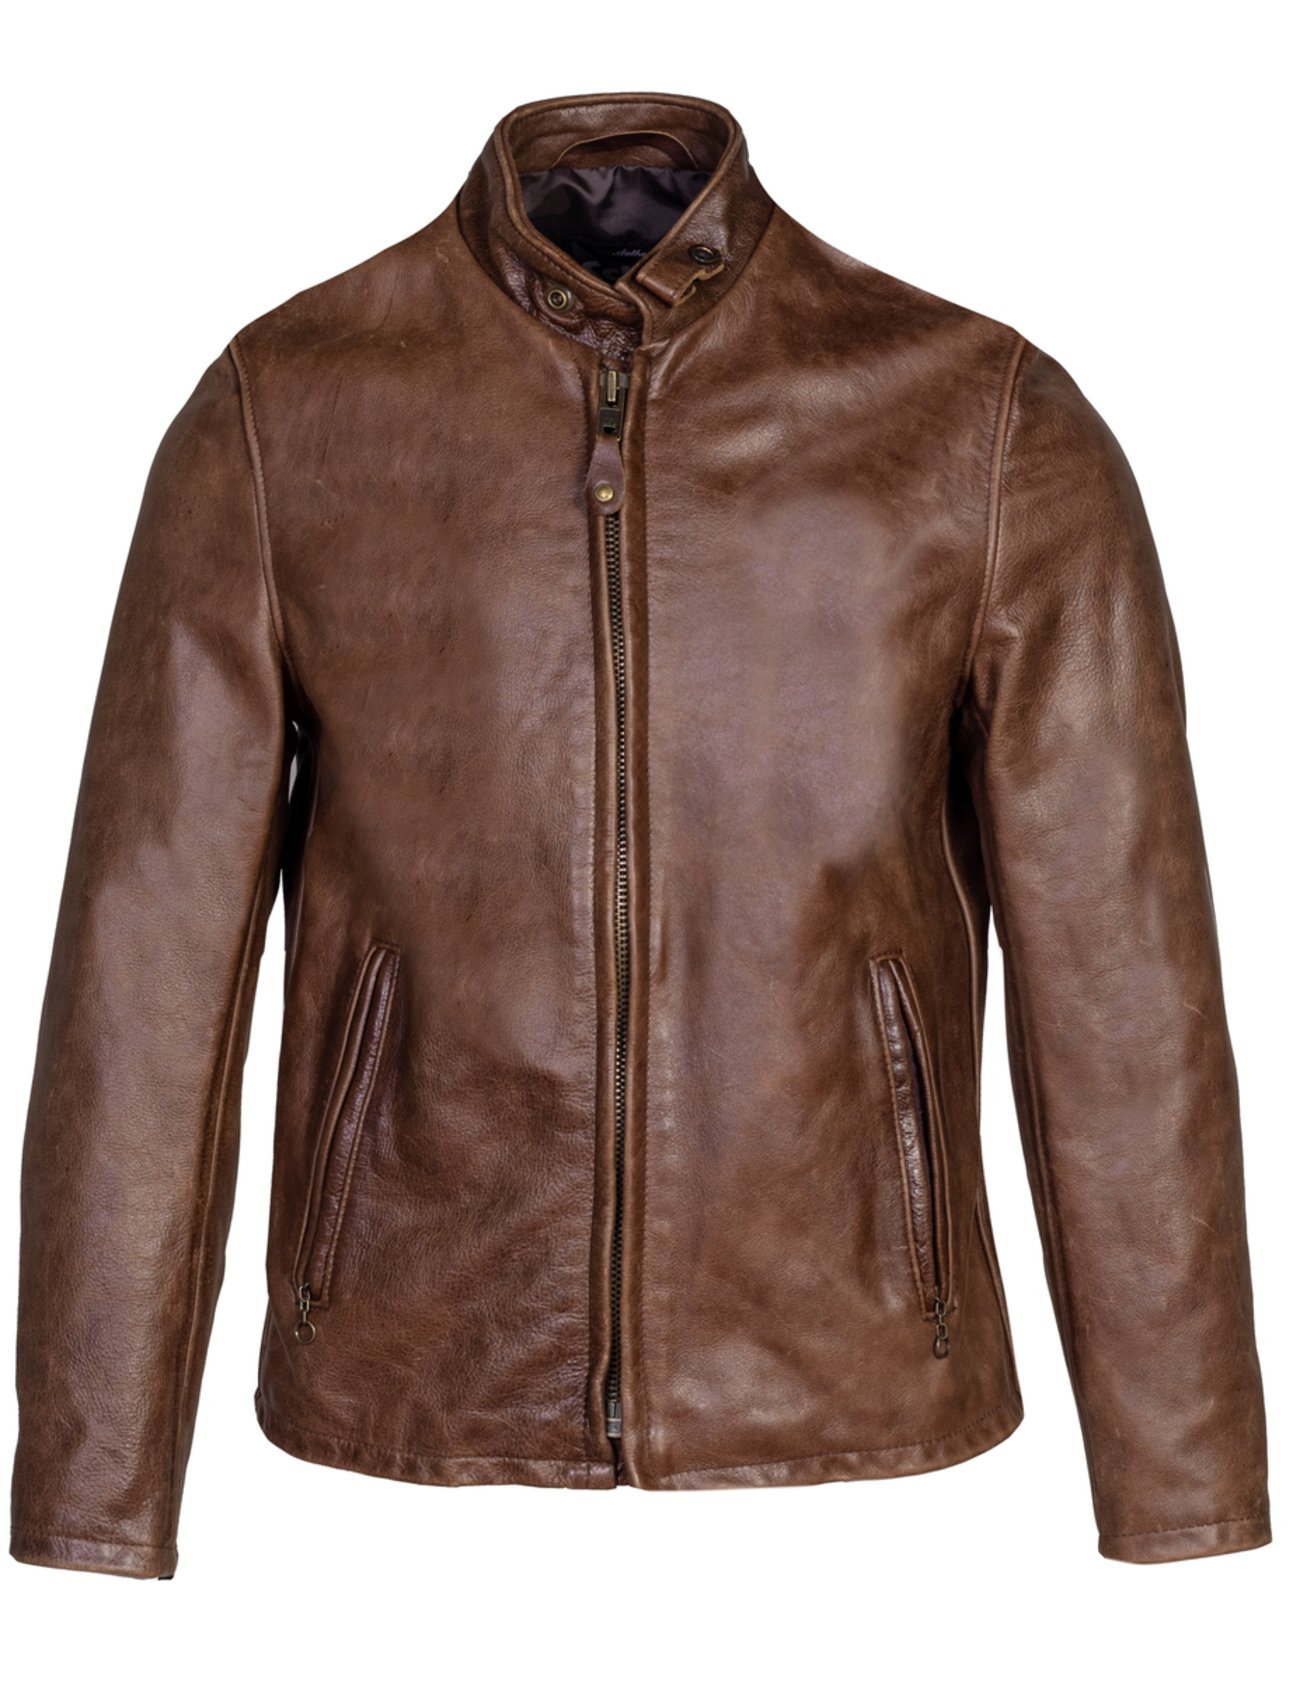 BLOUSON CAFE RACER COUPE SLIM - SCHOTT USA - ANT.BROWN